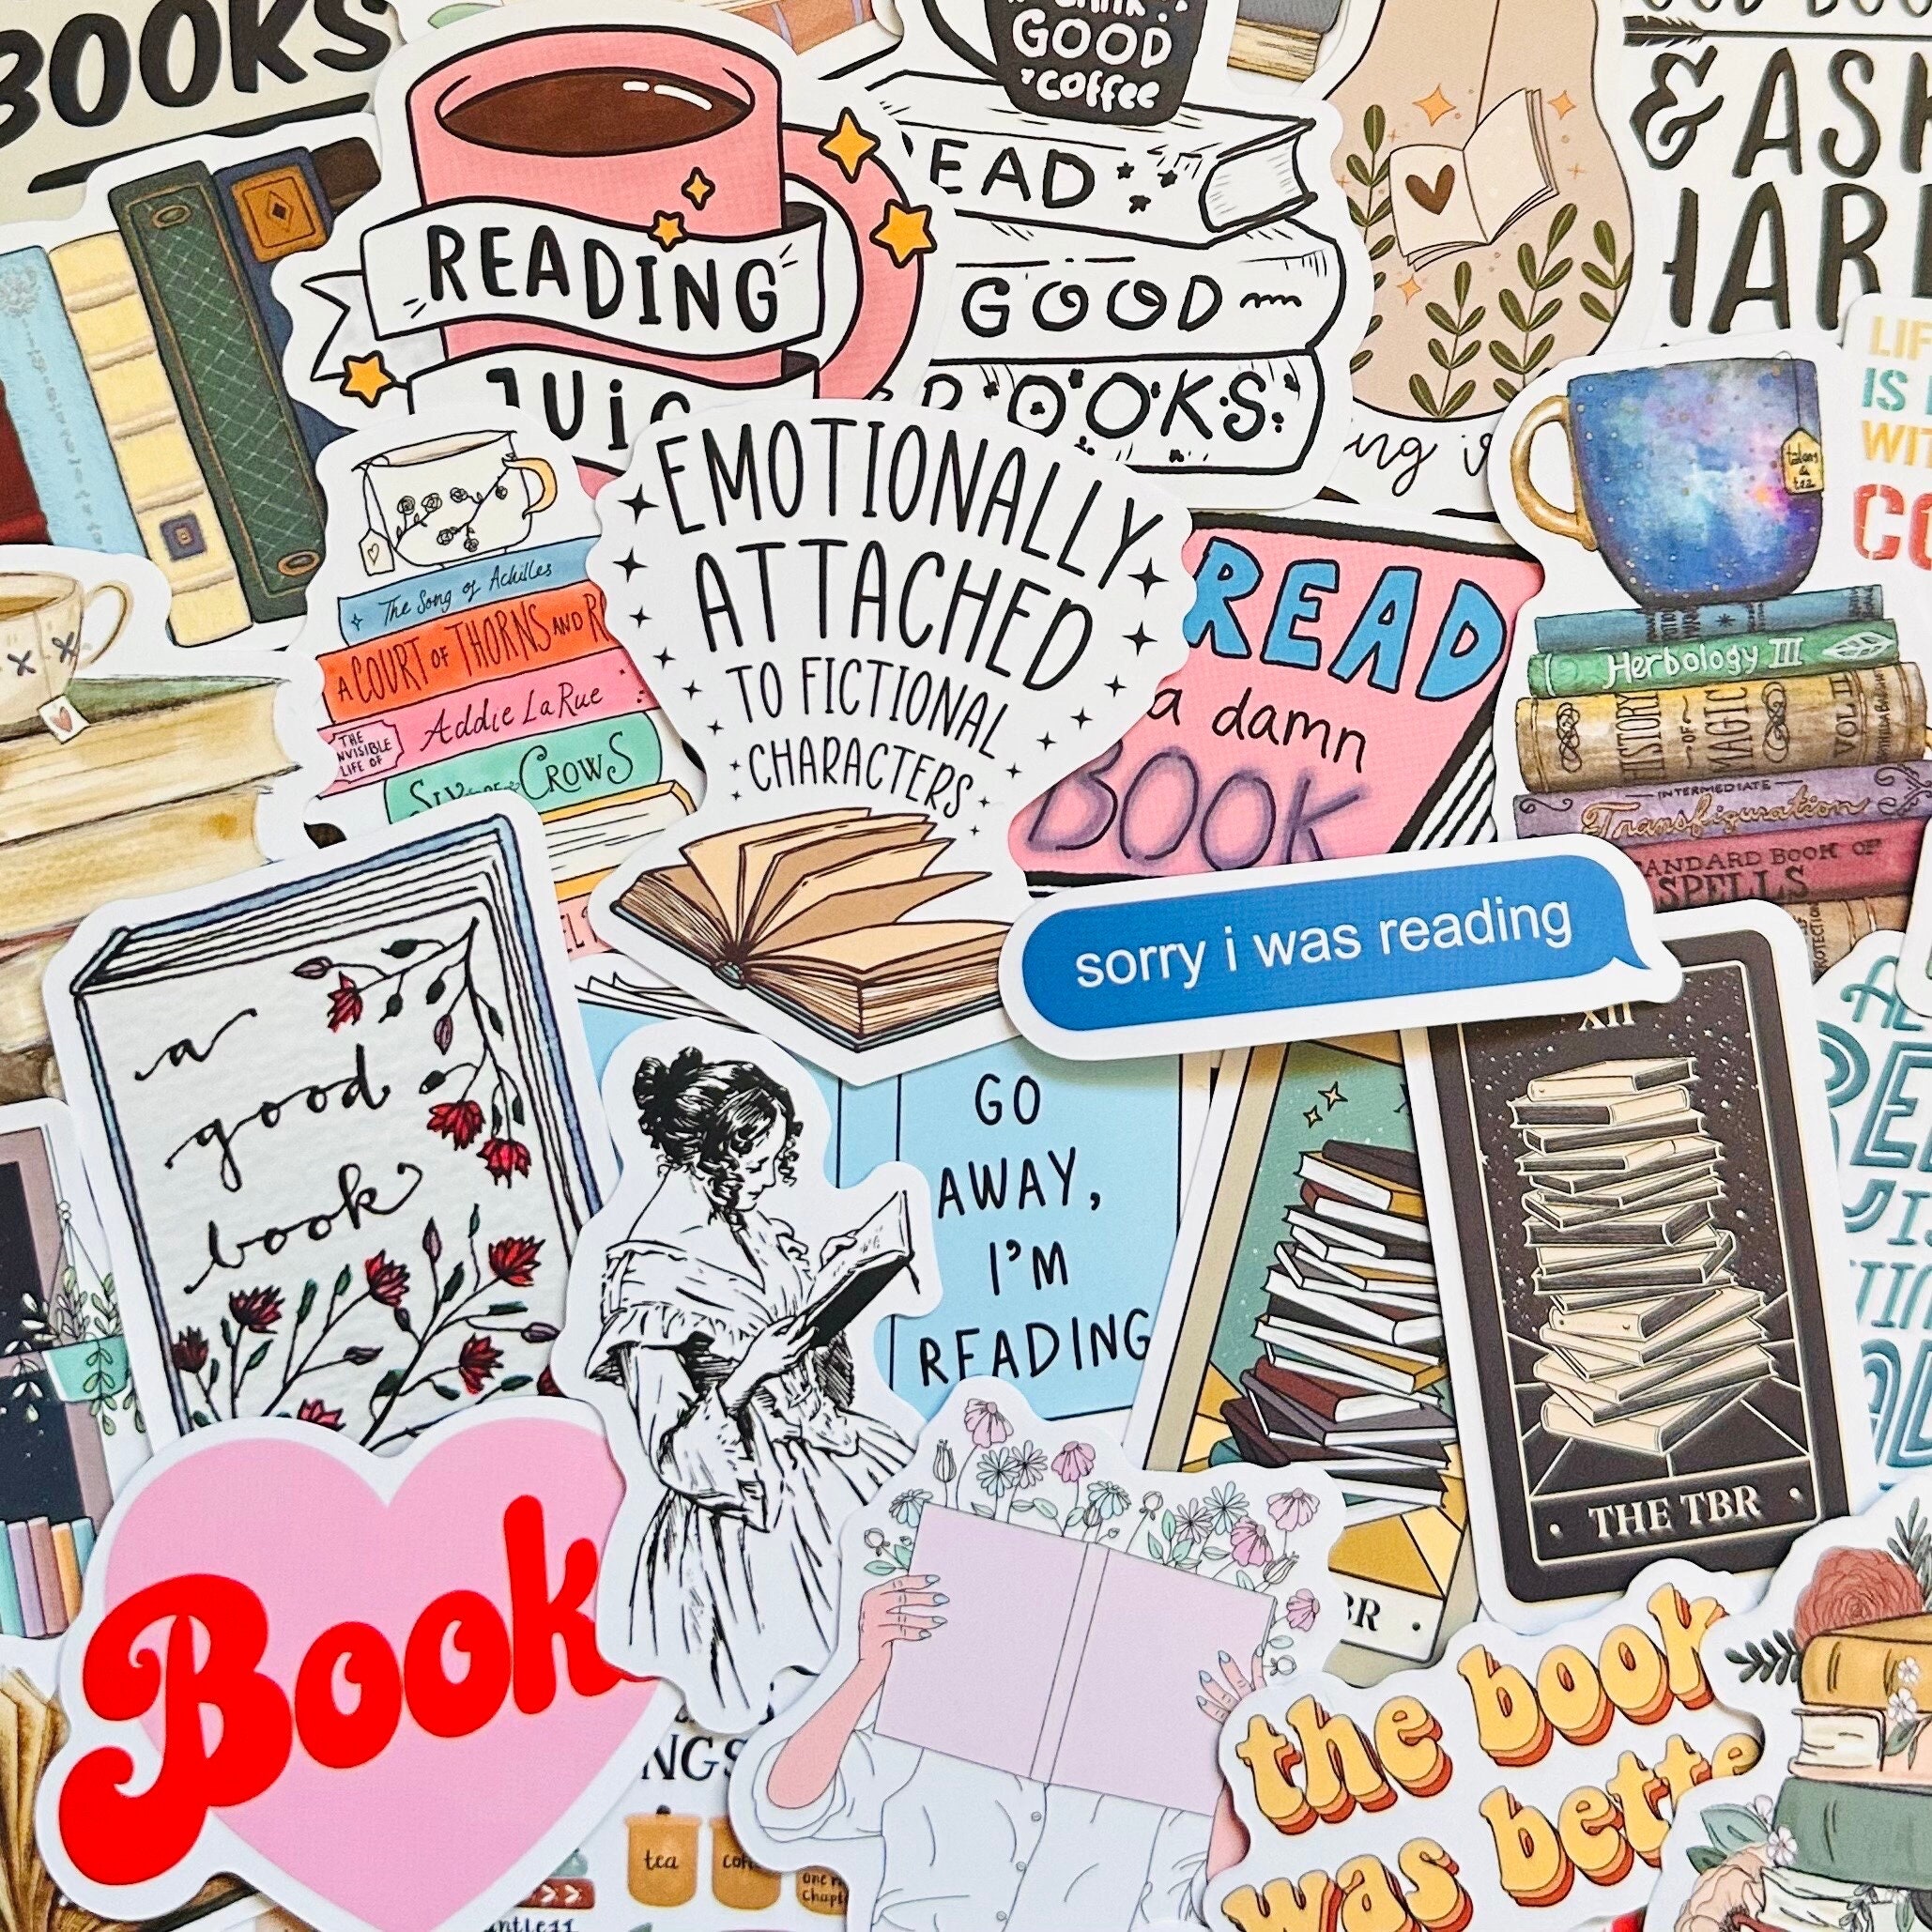 Buy Book Stickers Online In India -  India